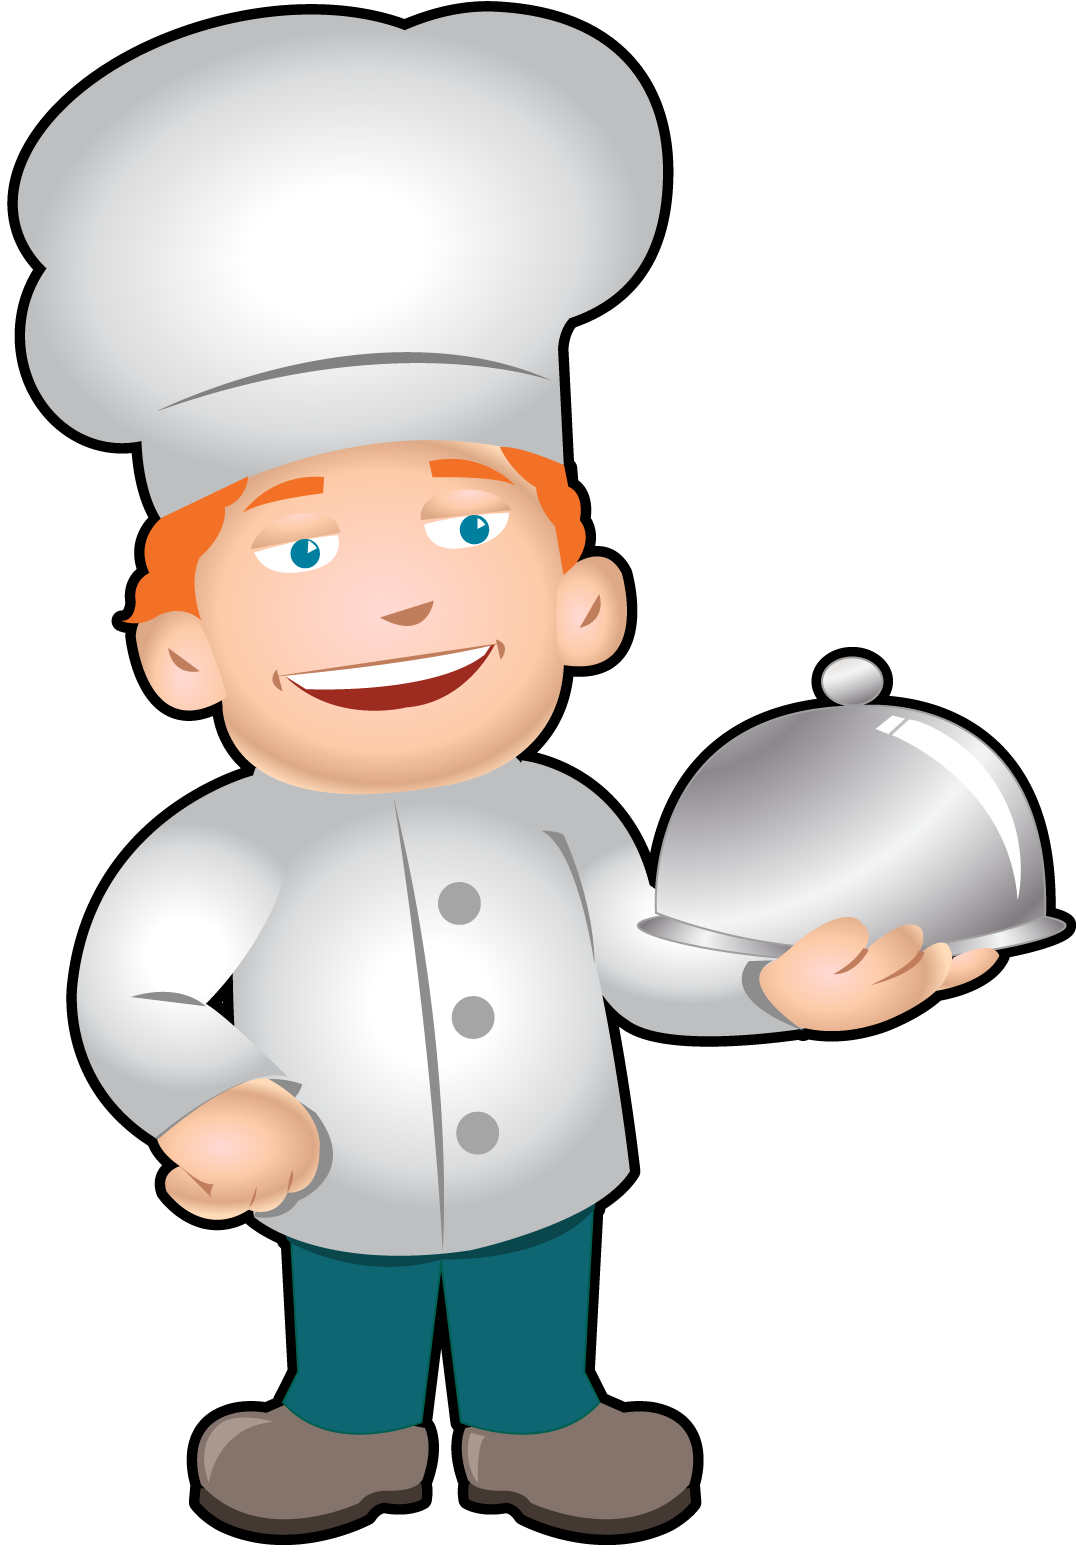 Chef Free To Use Cliparts 3 Clip Art Library